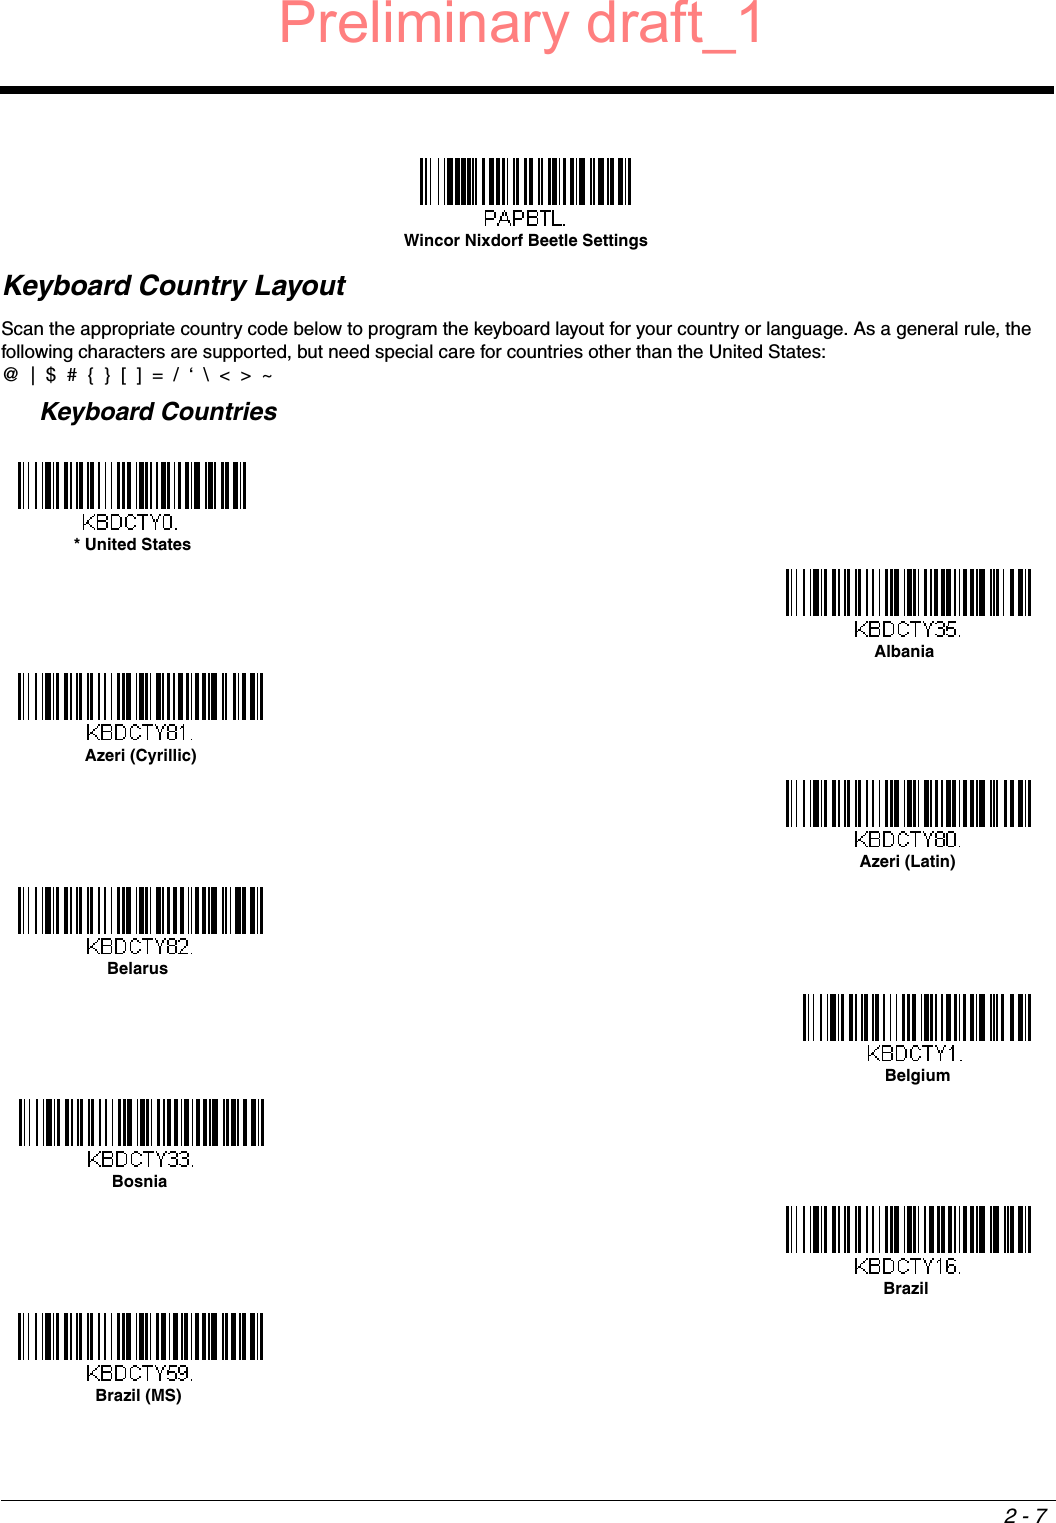 2 - 7Keyboard Country LayoutScan the appropriate country code below to program the keyboard layout for your country or language. As a general rule, the following characters are supported, but need special care for countries other than the United States:@  |  $  #  {  }  [  ]  =  /  ‘  \  &lt;  &gt;  ~  Keyboard CountriesWincor Nixdorf Beetle Settings* United States AlbaniaAzeri (Cyrillic)Azeri (Latin)BelarusBelgiumBosniaBrazilBrazil (MS)Preliminary draft_1